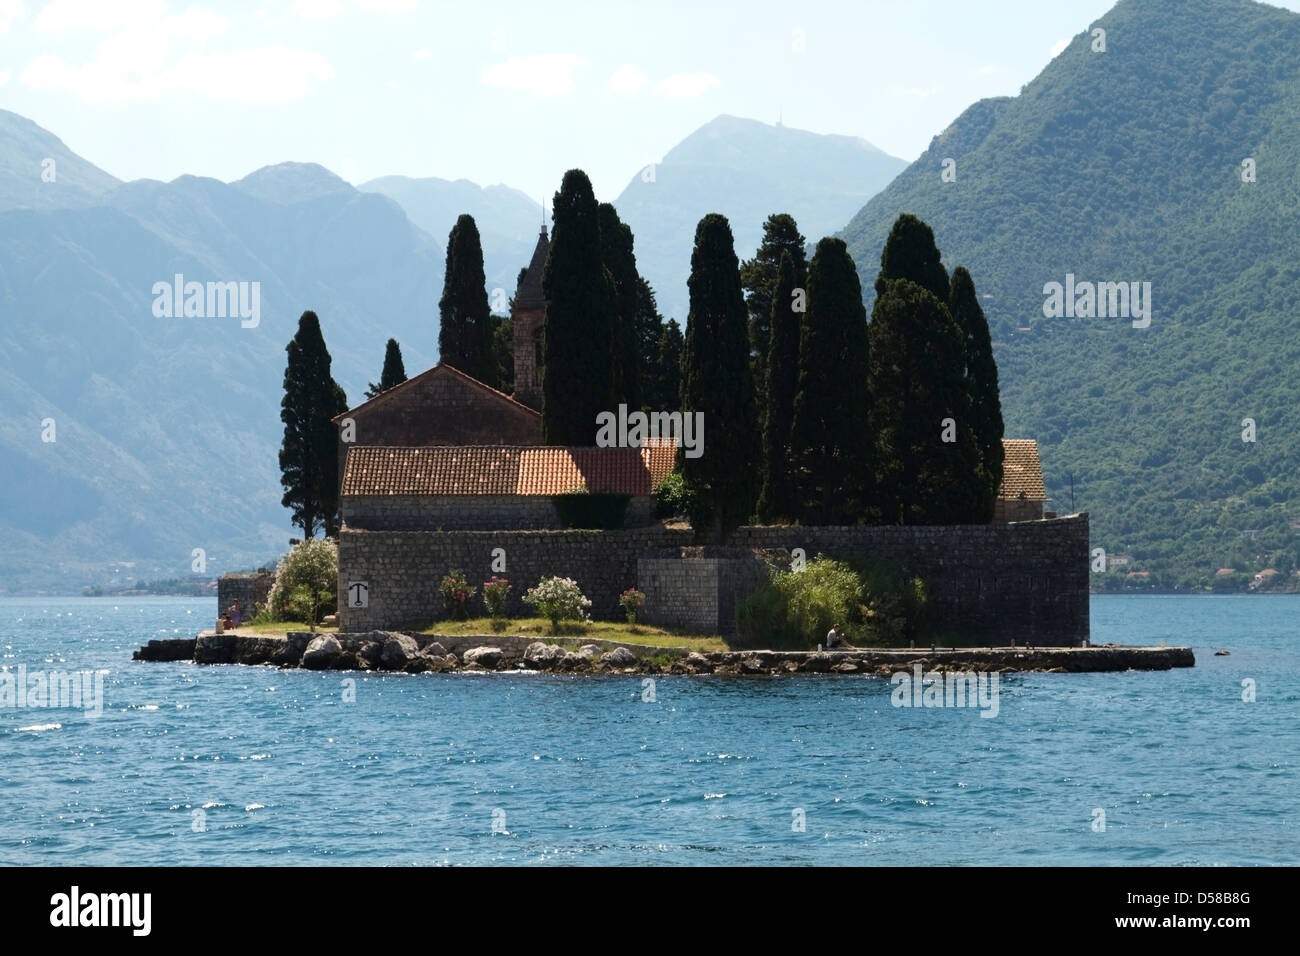 St George Island near to Perast in the Bay of Kotor; Montenegro Stock Photo